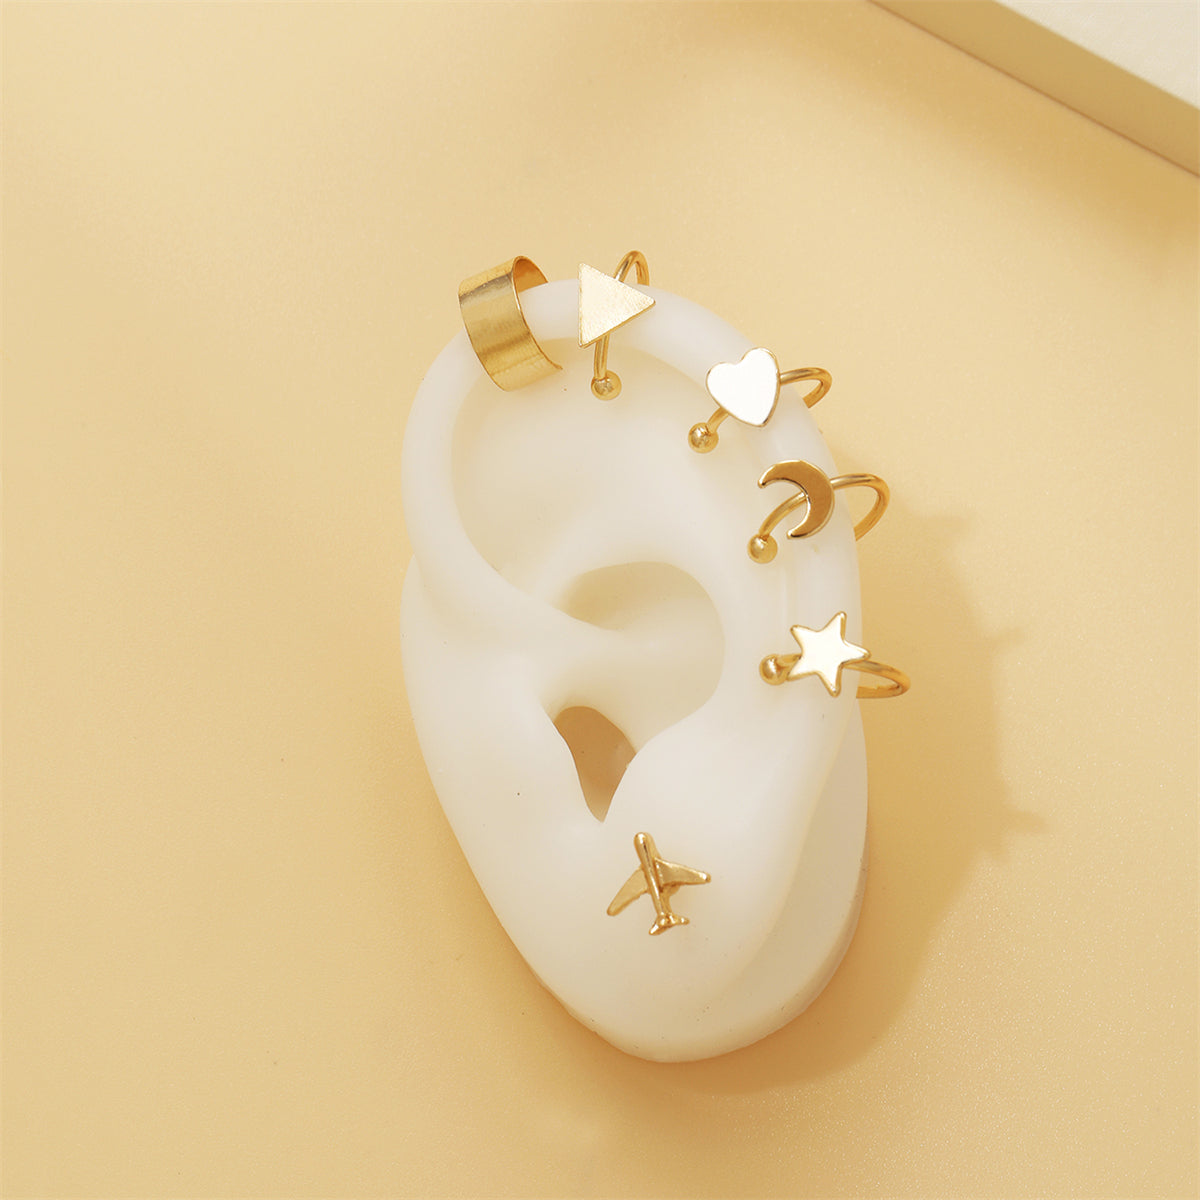 18K Gold-Plated Airplane Stud Earring & Celestial Ear Cuff Set